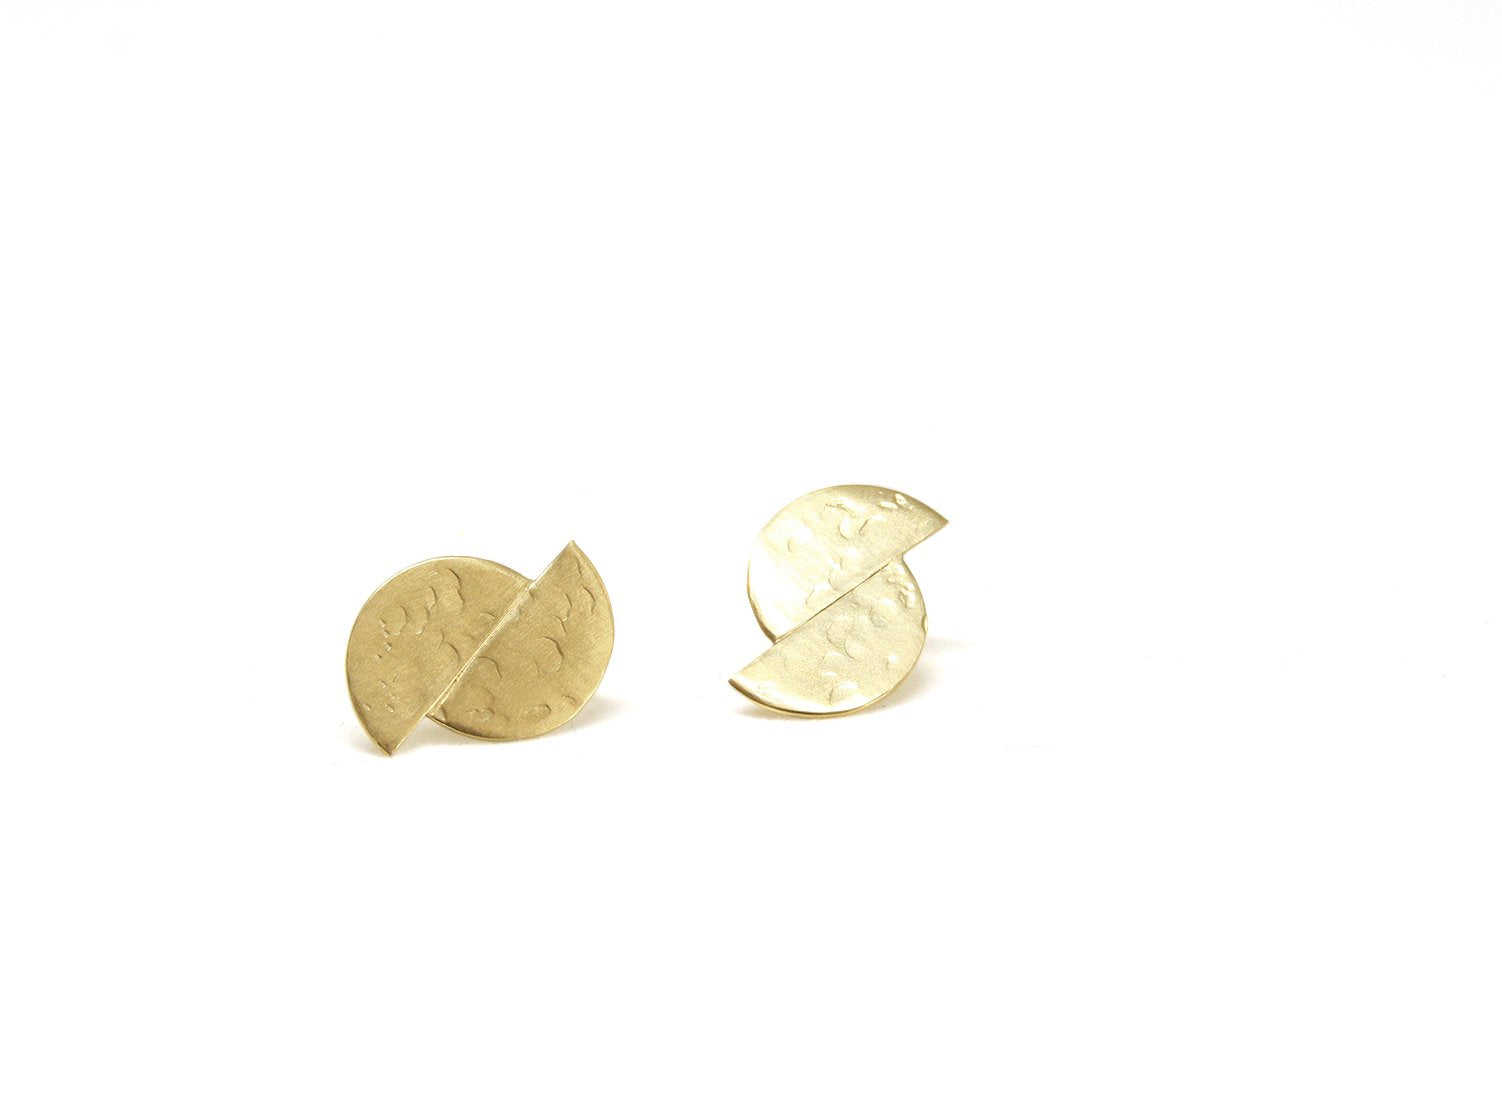 llayers jewelry lacus earrings - stud earrings in textured gold plated -boucles d'oreilles disques décalés texture lunaire en or